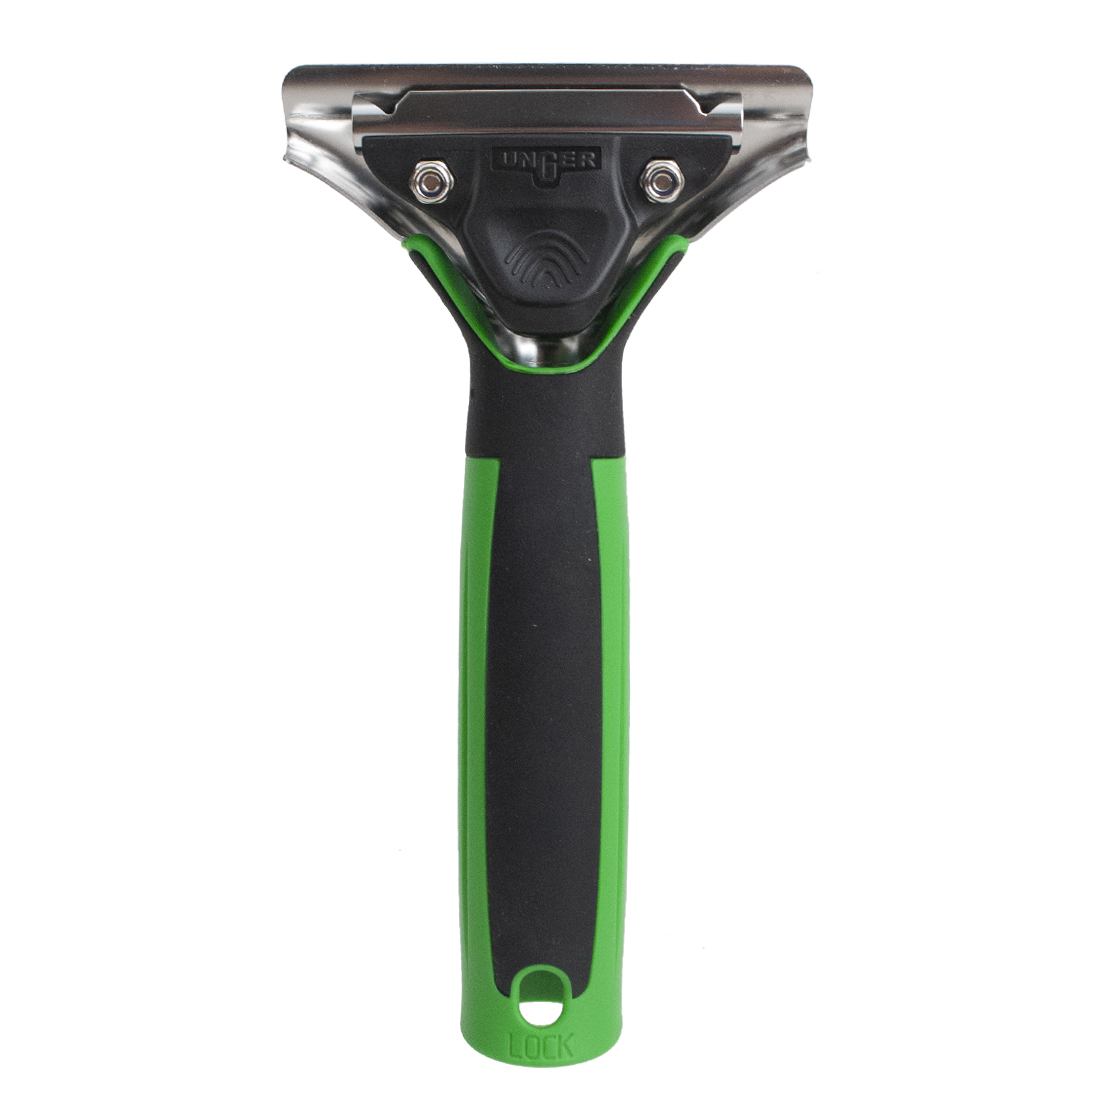 Unger ErgoTec XL Squeegee Handle - Back View